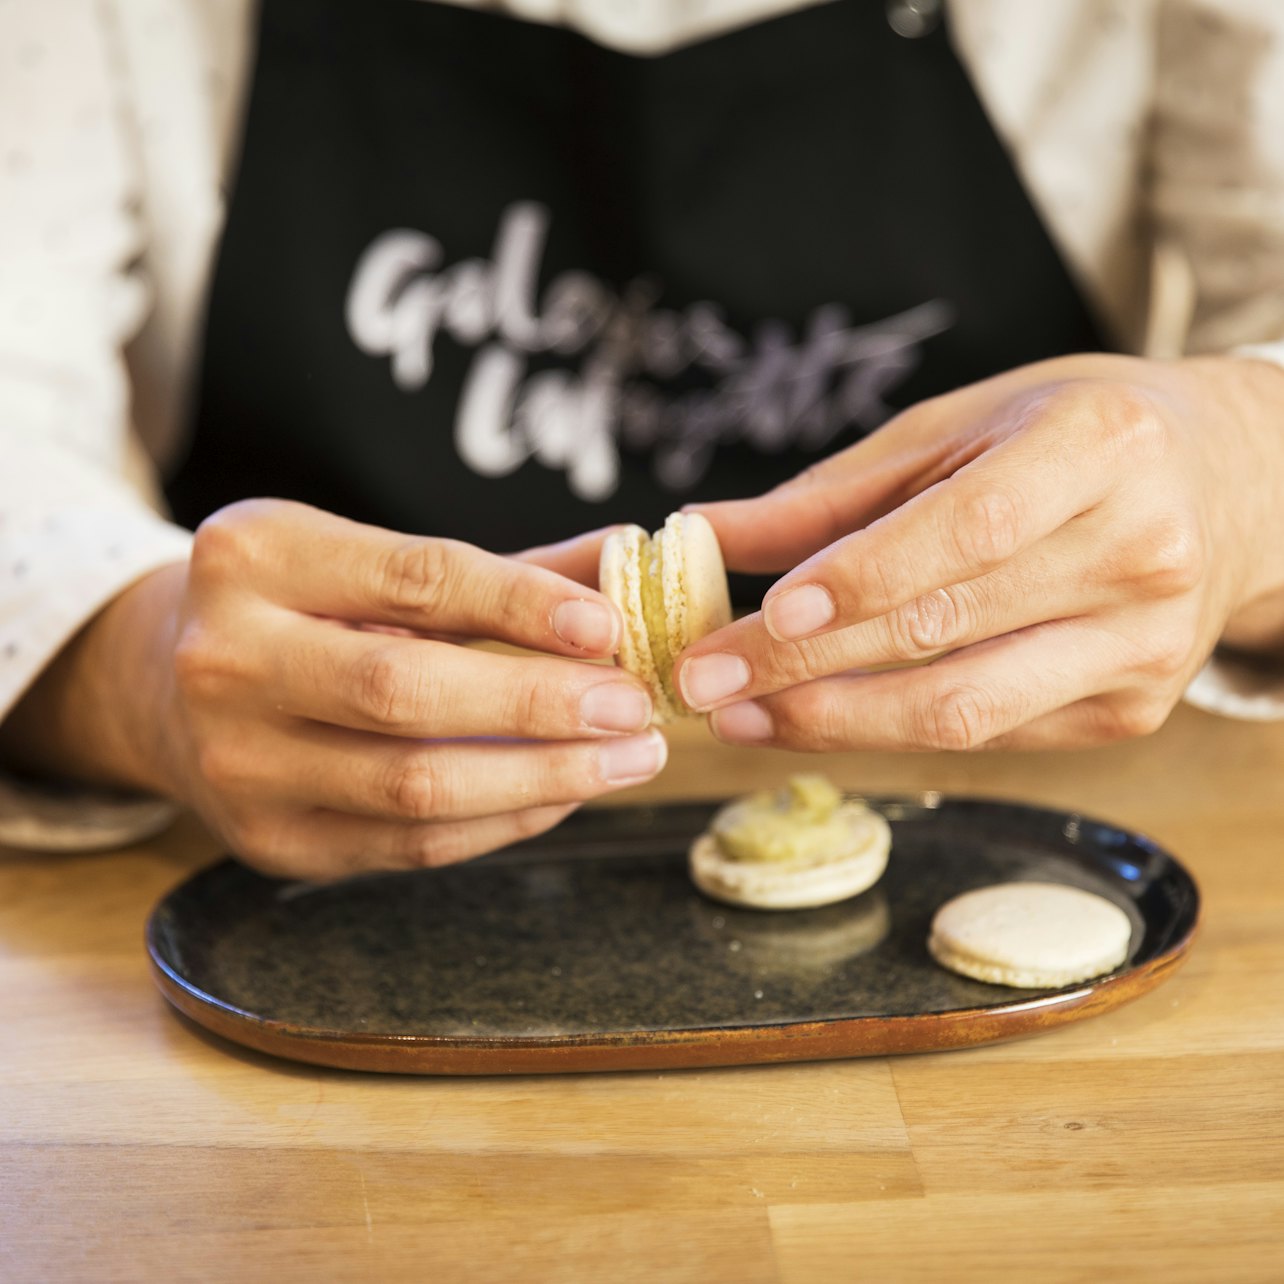 French Macaron Bakery Class - Accommodations in Paris